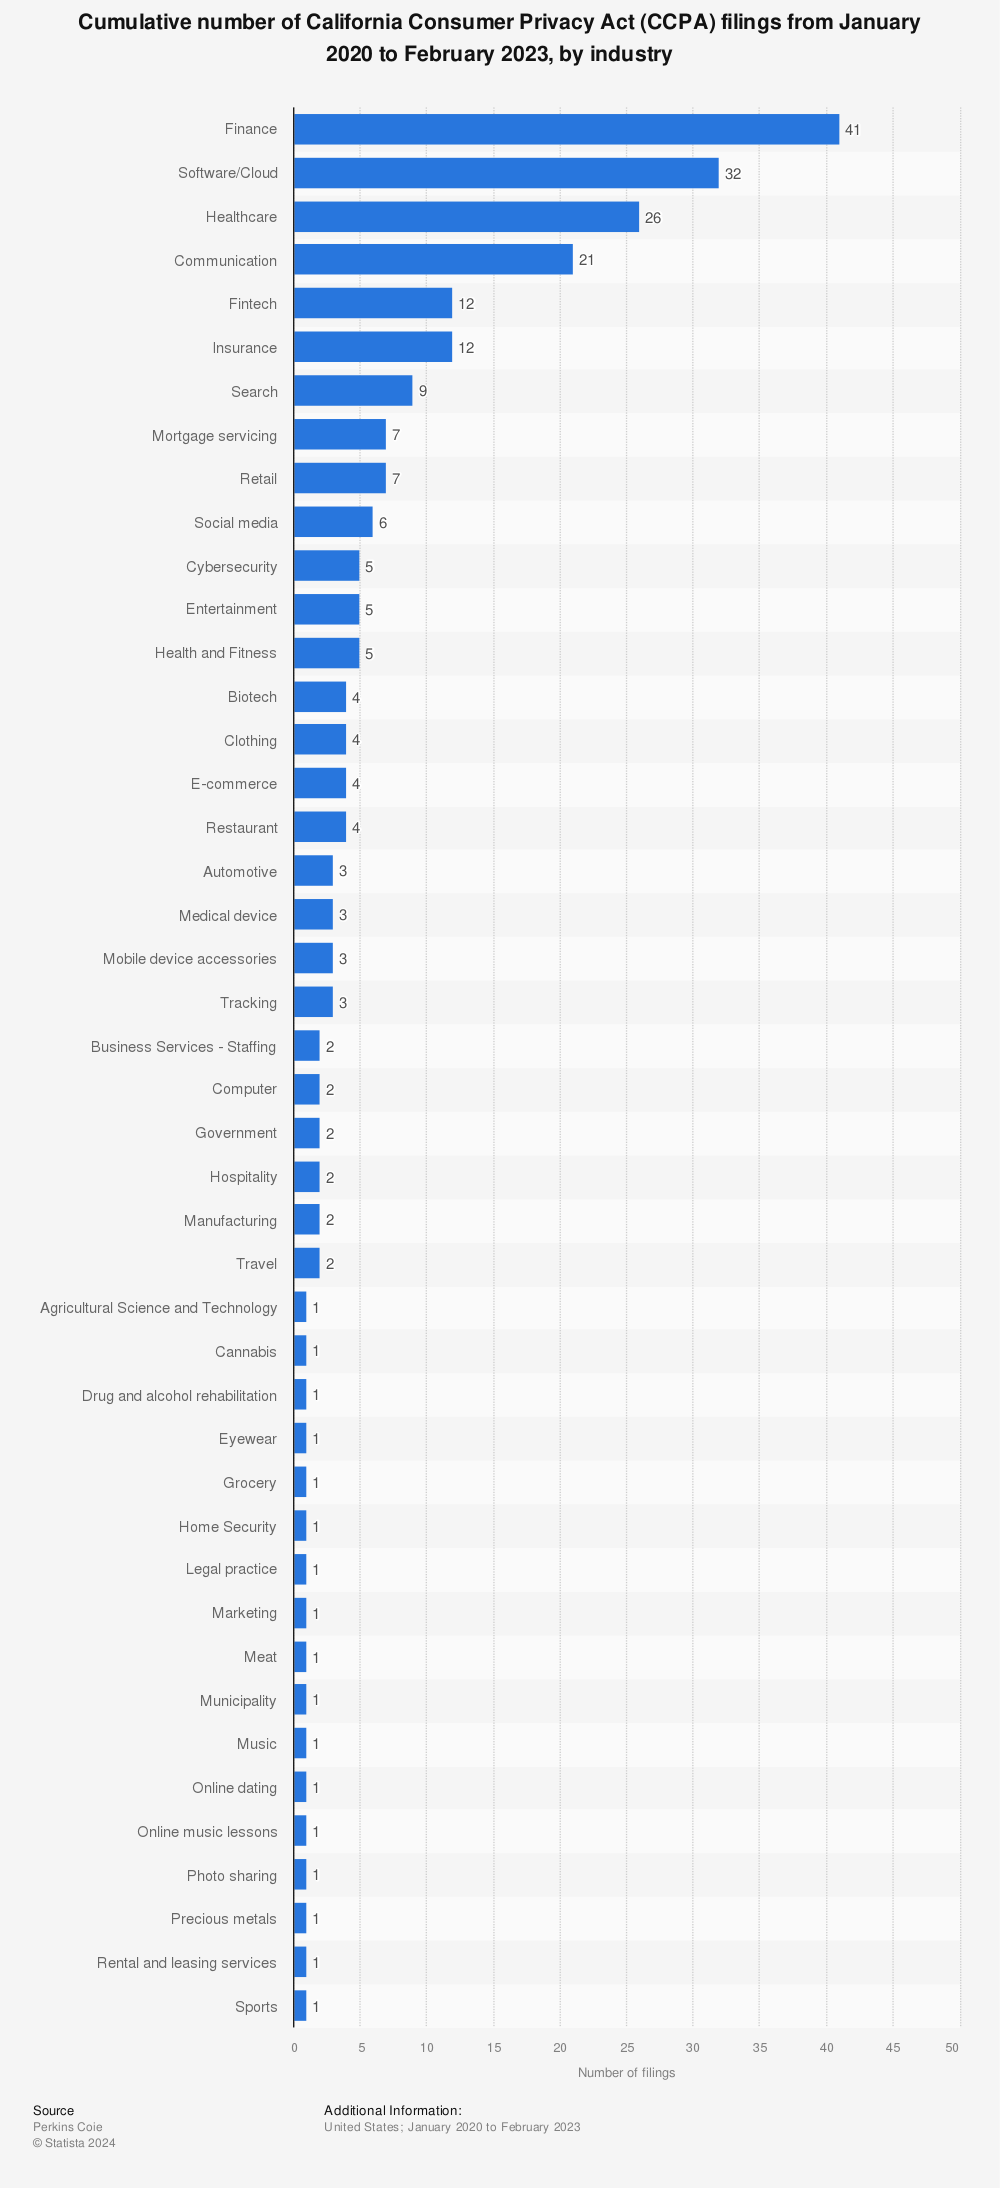 Statistic: Cumulative number of California Consumer Privacy Act (CCPA) filings from January 2020 to February 2023, by industry | Statista